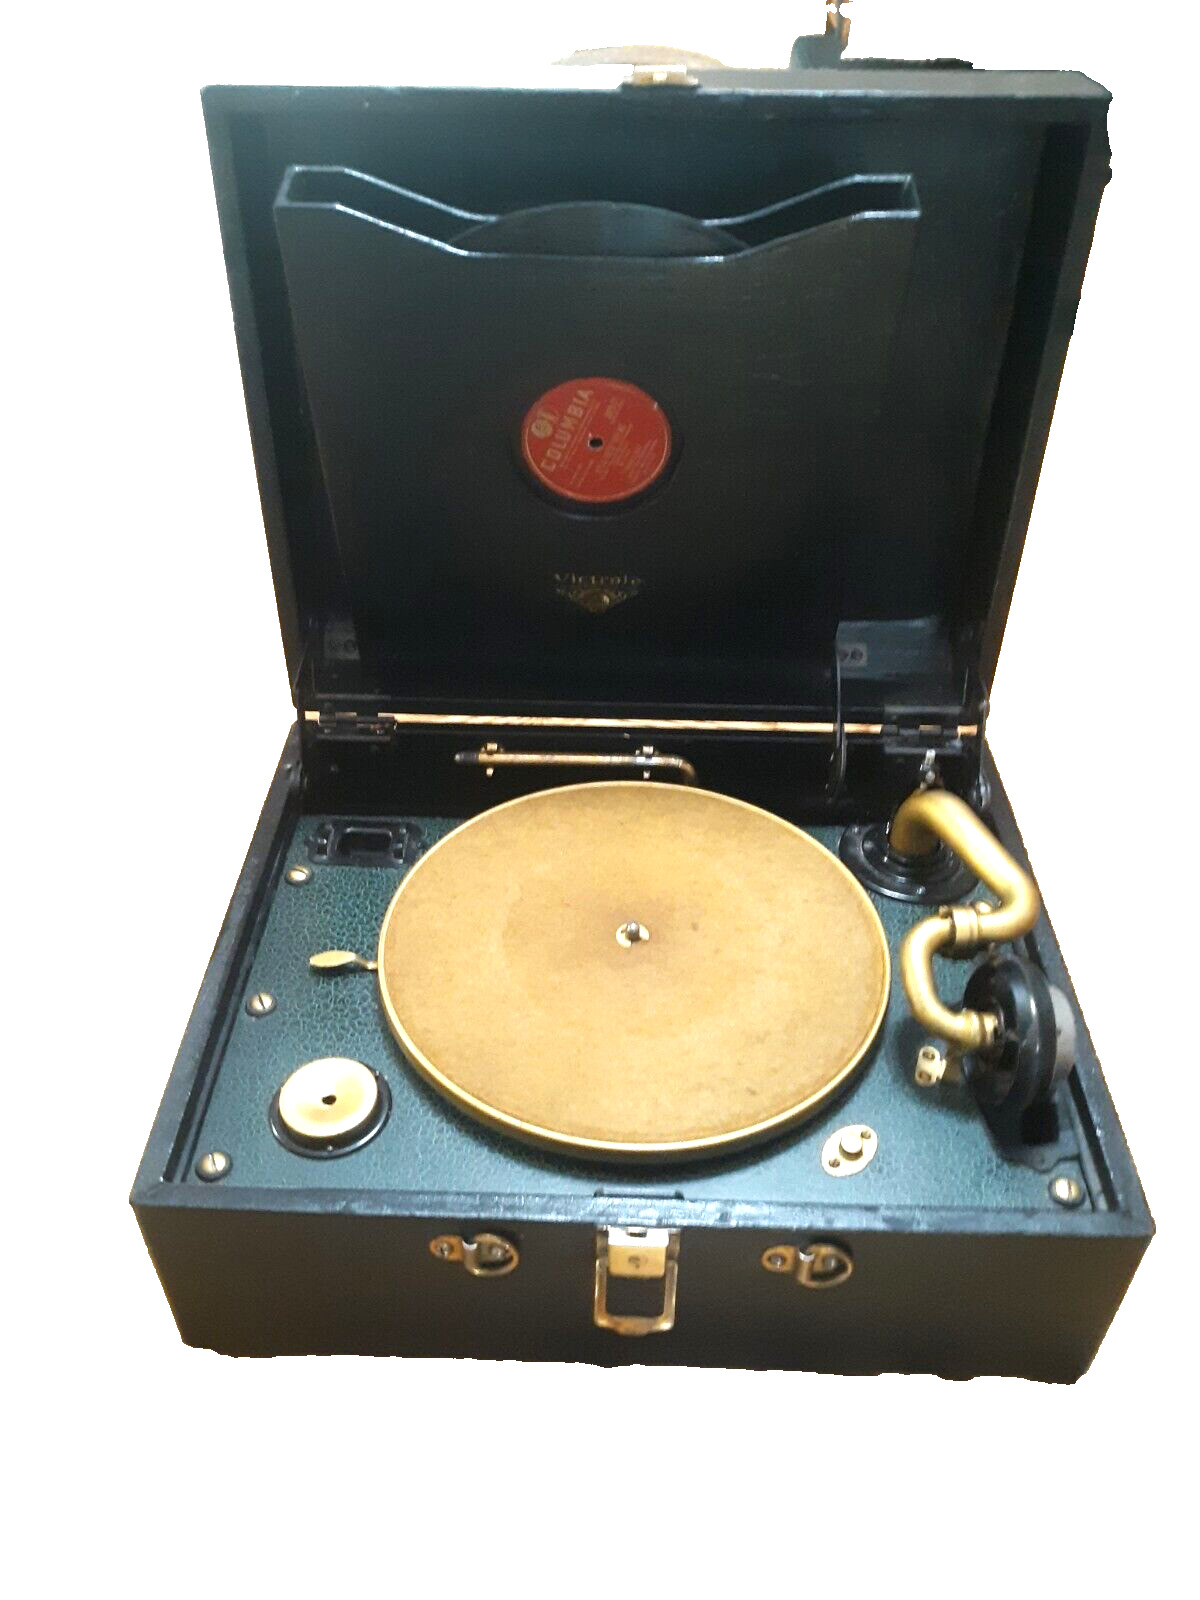 Excellent Cosmeticly & Working 1920\'s Victor Portable Handcrank 78 RPM Phono VV2